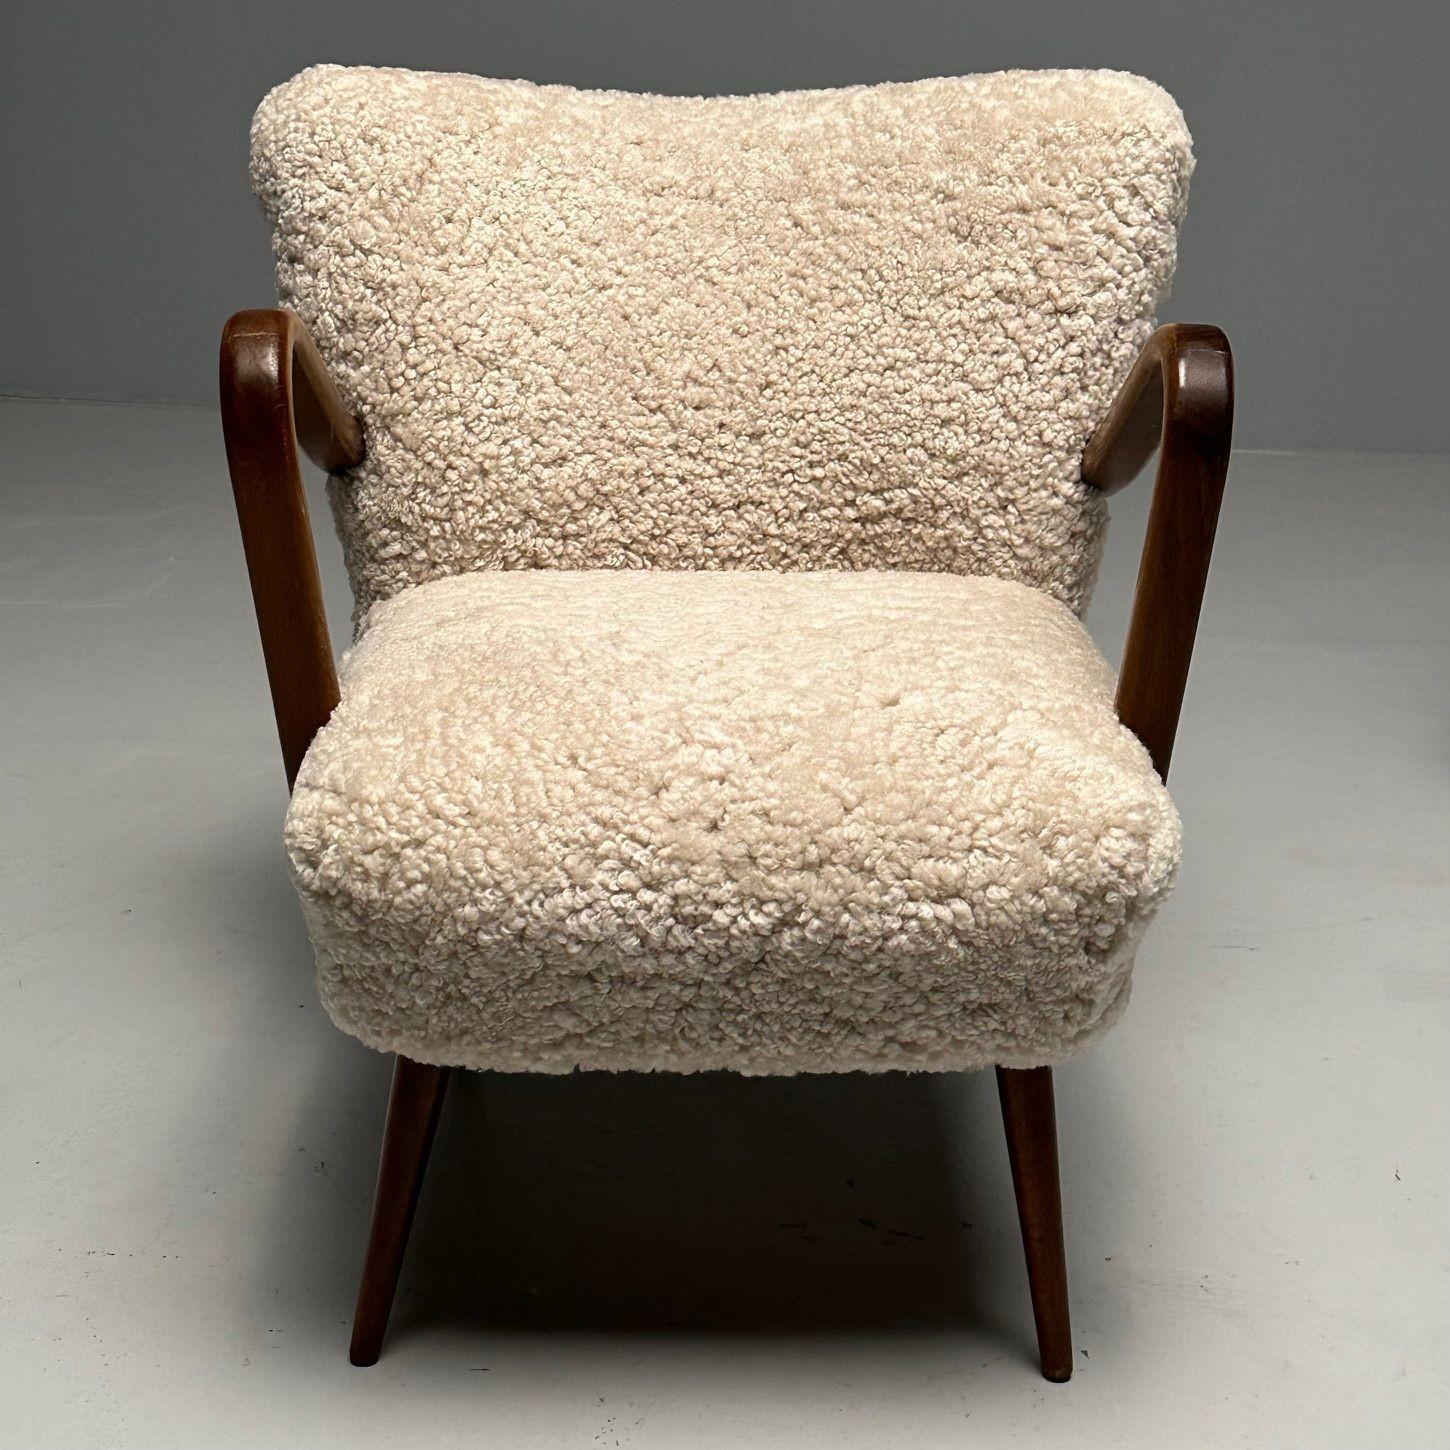 Swedish Mid-Century Modern, Shearling Lounge Chair, Sheepskin, Beech, 1950s In Good Condition For Sale In Stamford, CT